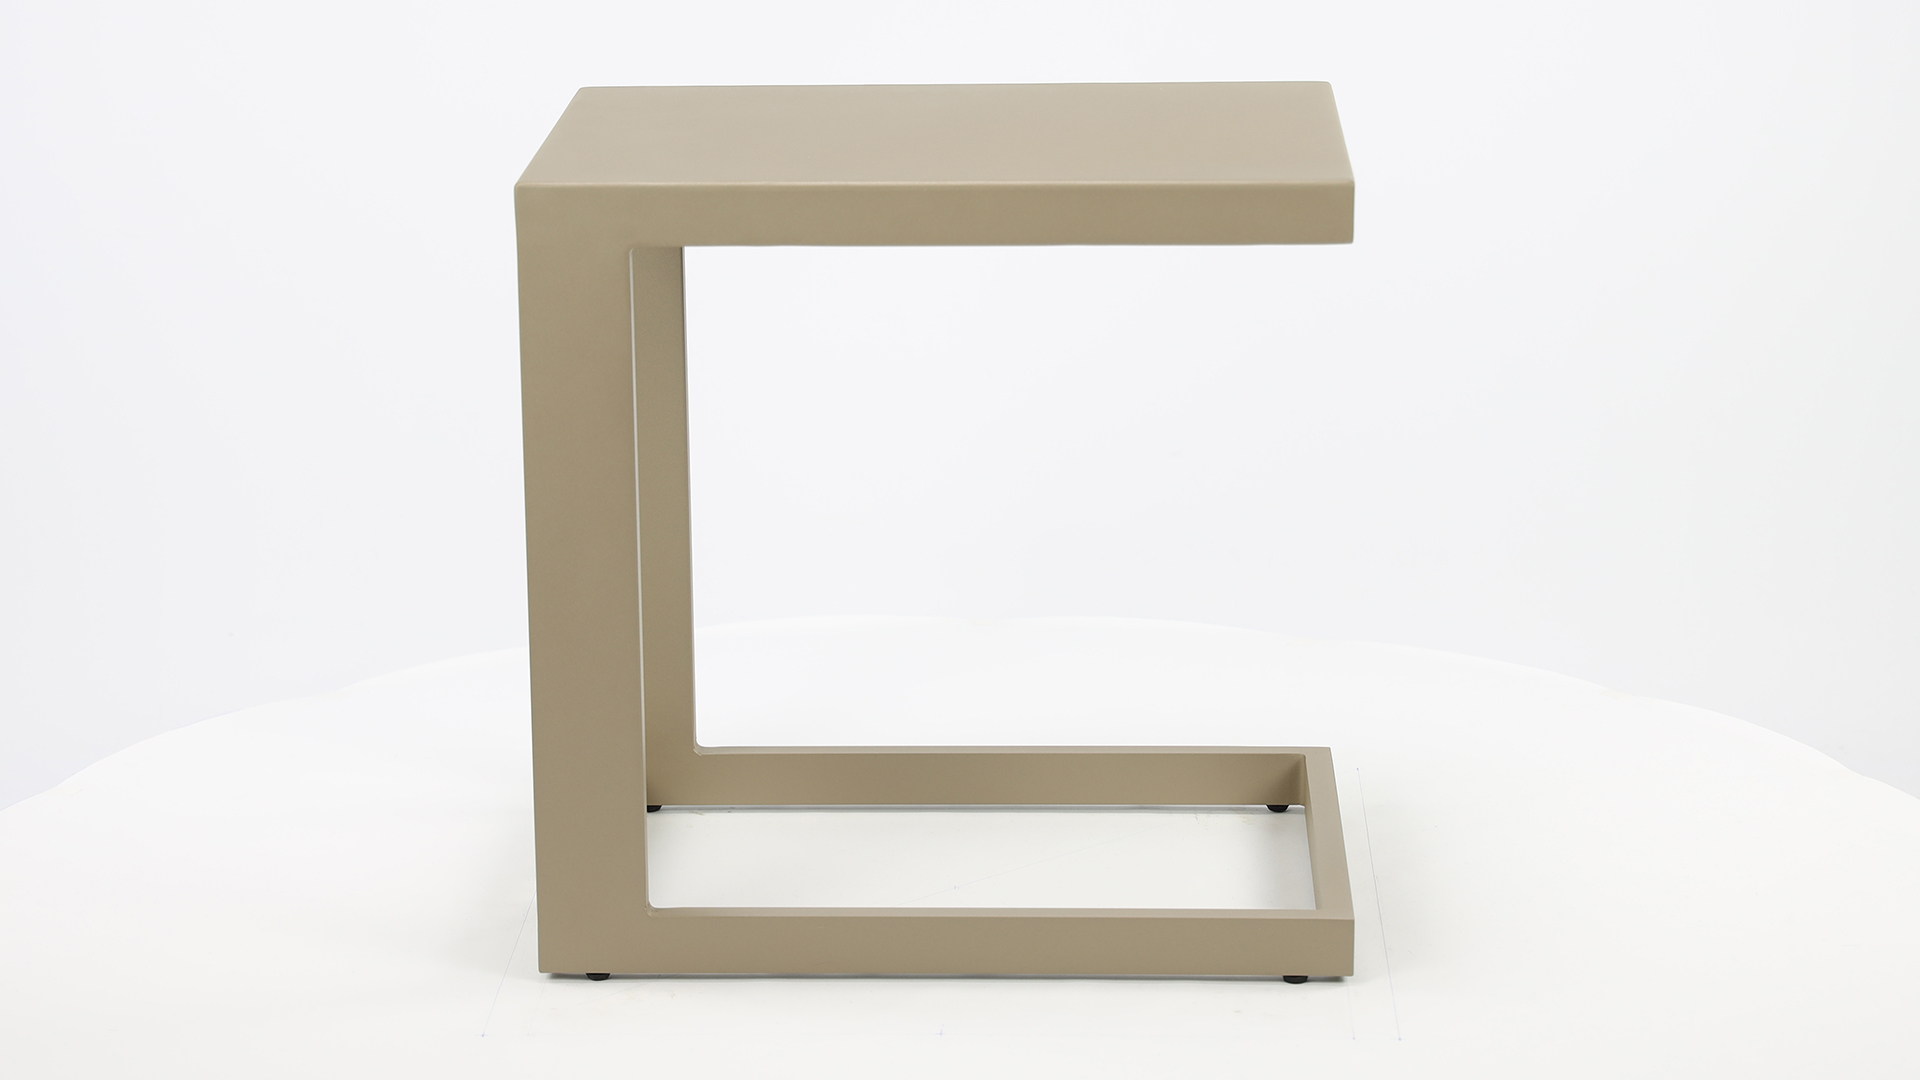 Alu Side Table Sion Champagne Mat 55 x 40 x H55cm